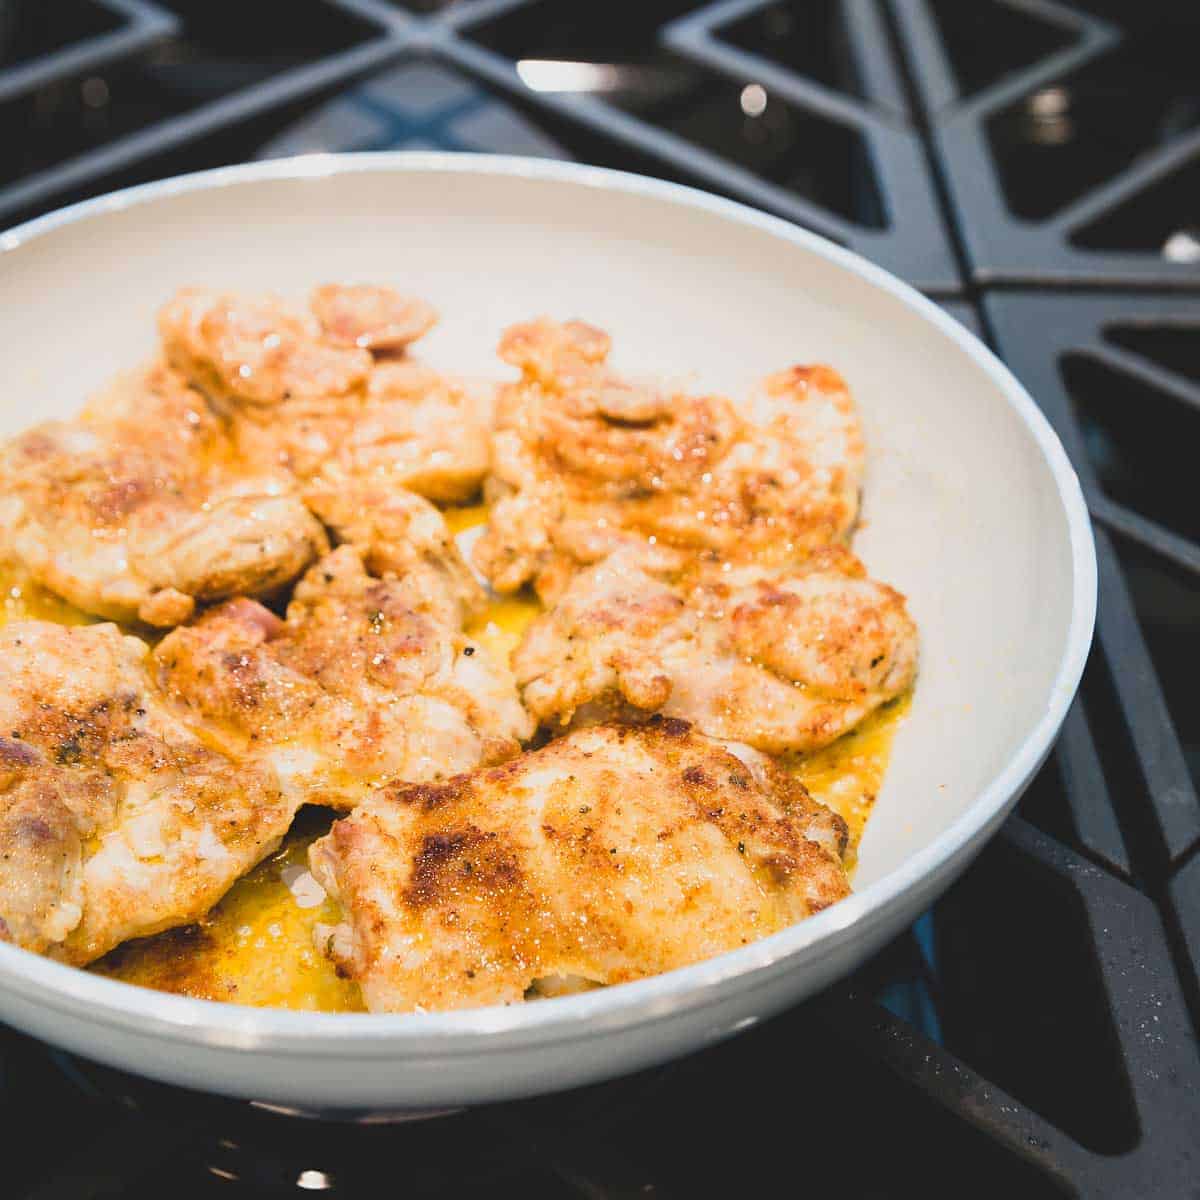 This easy cream cheese sauce chicken recipe is made in one skillet in just 20 minutes.